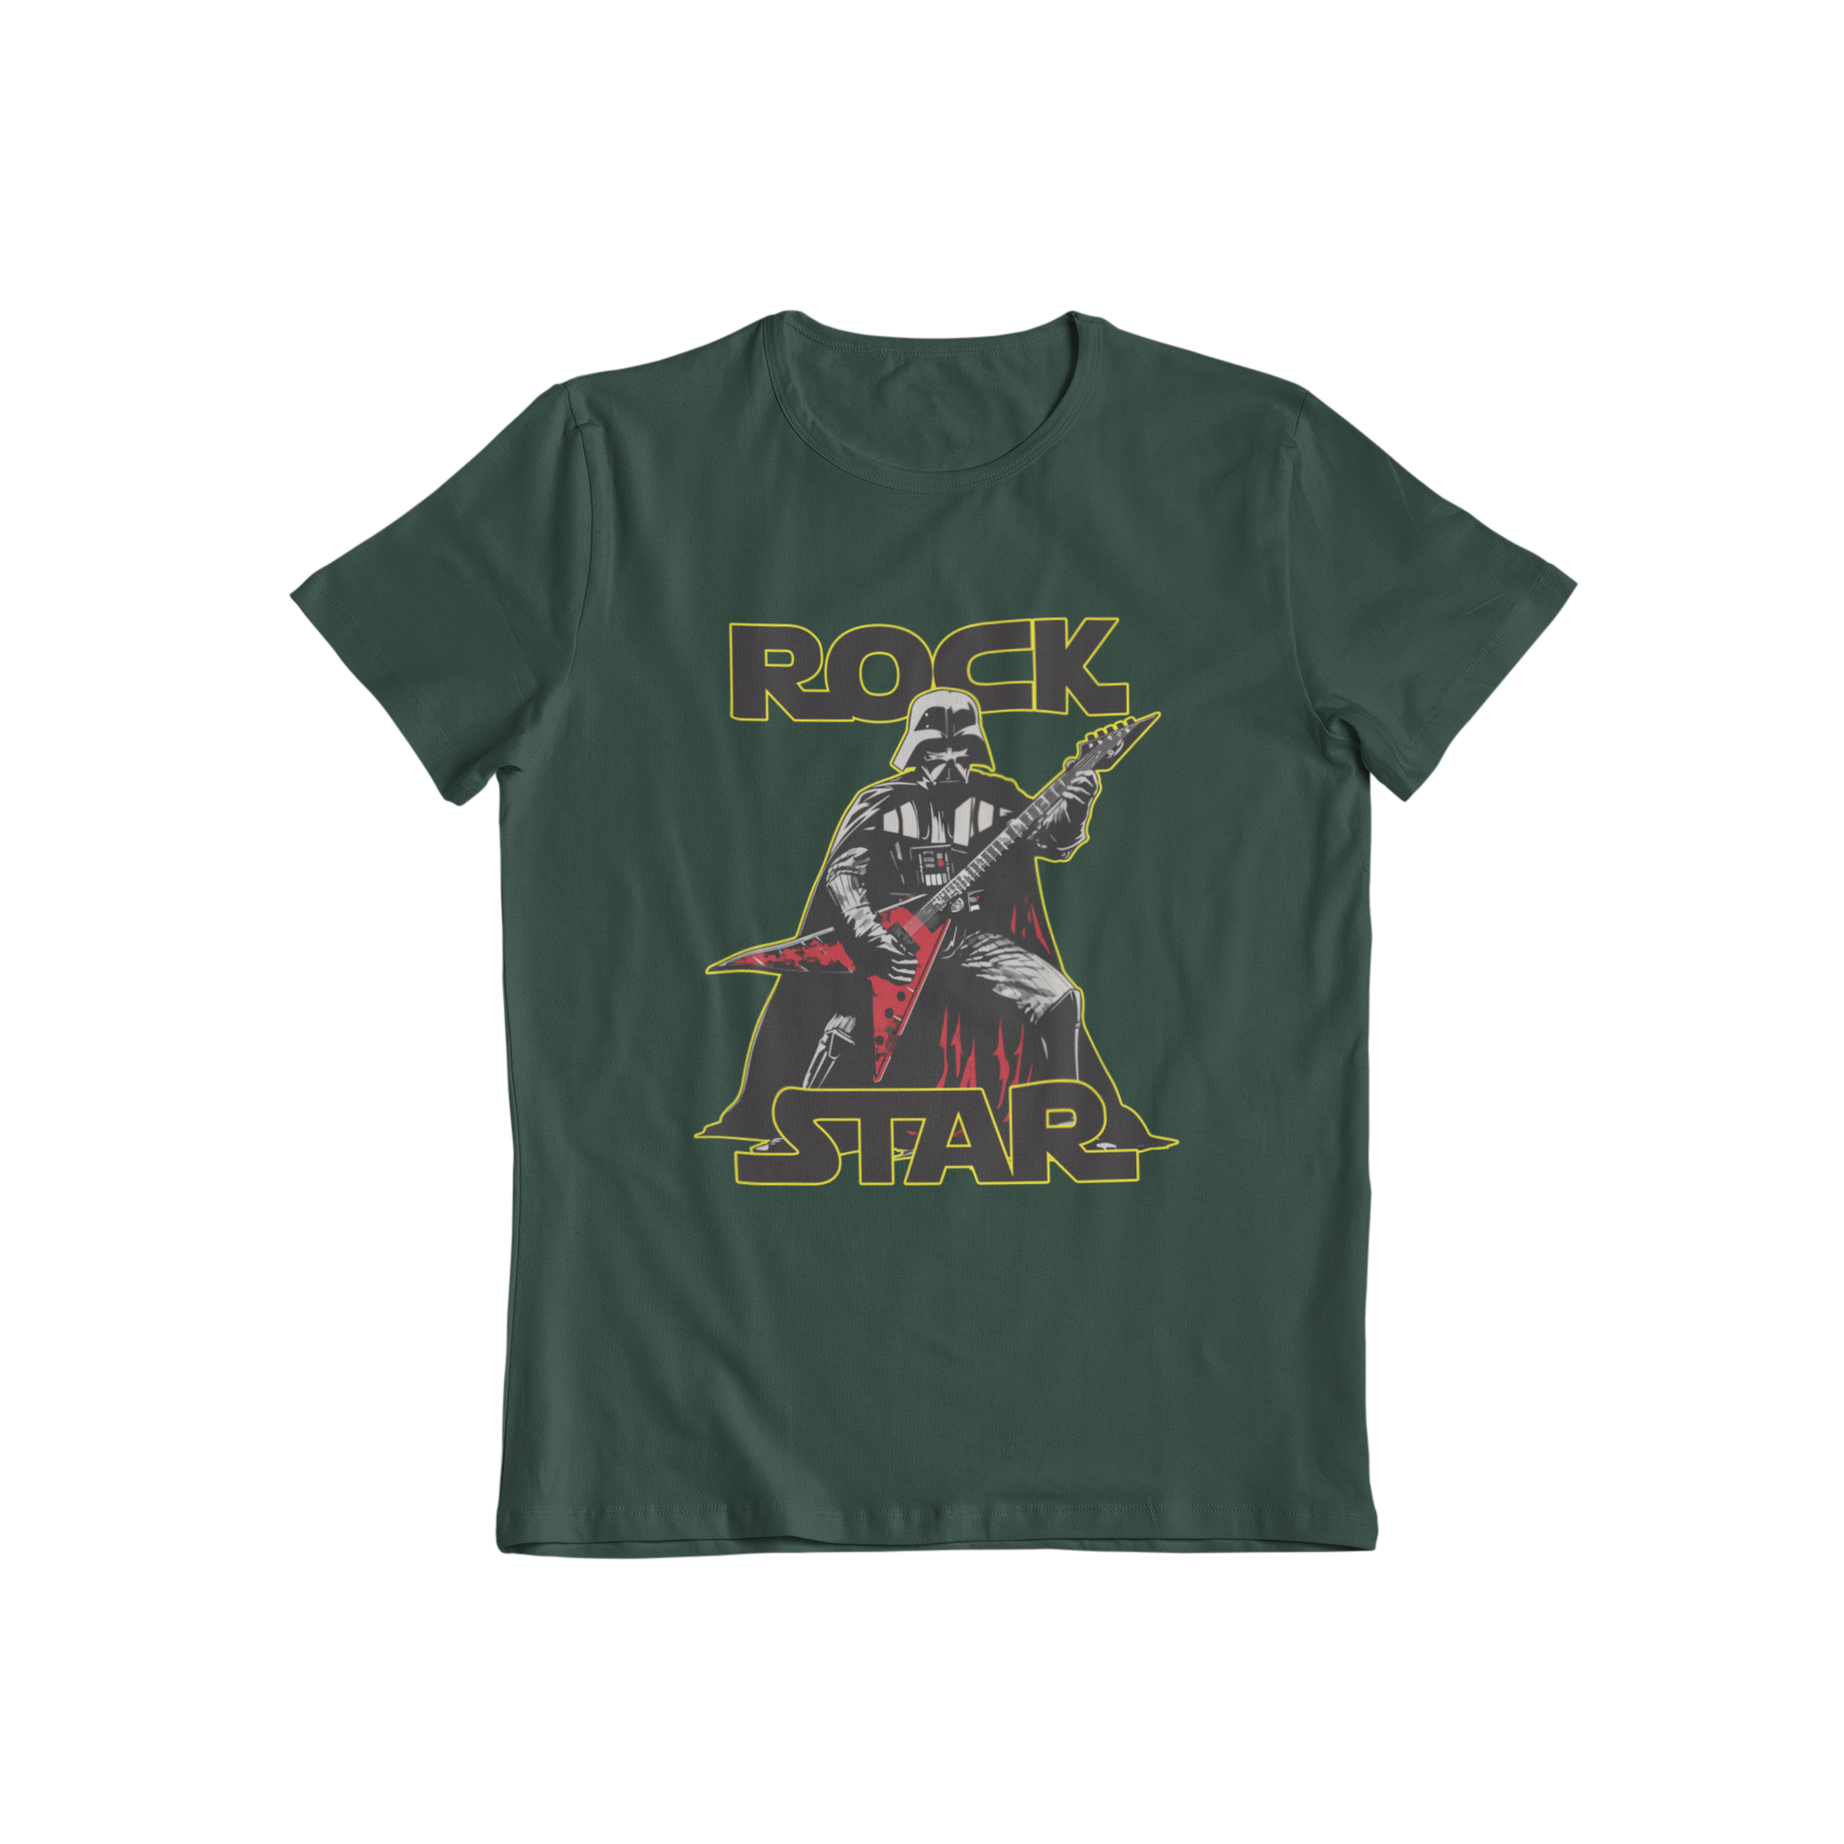 Unleash your inner star power with our Rockstar T-shirt! This classic graphic tee pays homage to Star Wars with a guitar-slinging Darth Vader. Show off your love for the iconic film in a unique and playful way. May the music be with you!